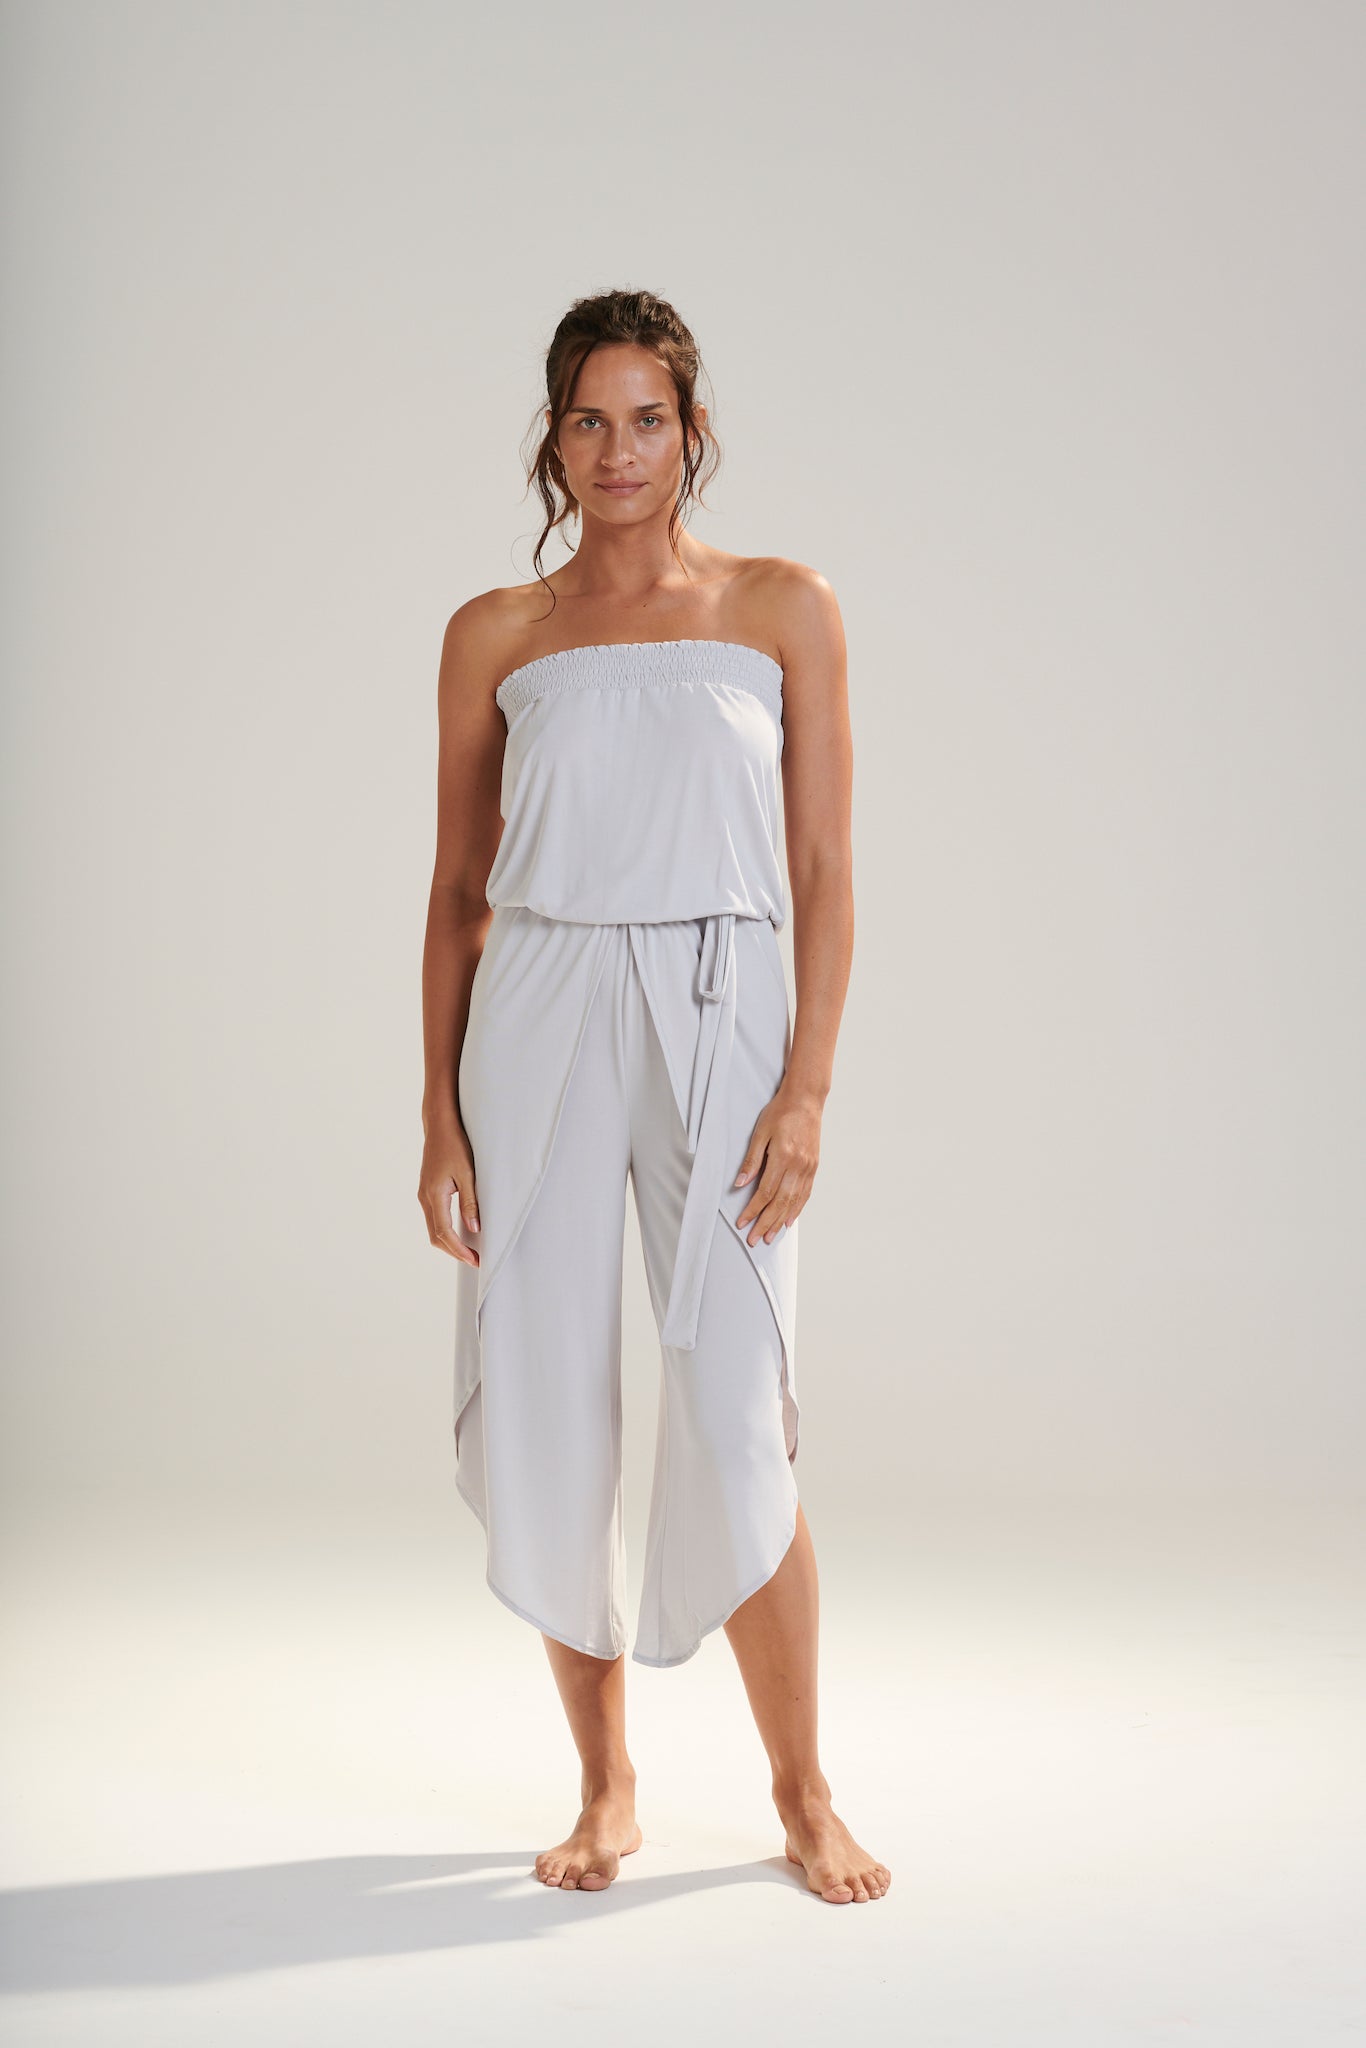 FREYA JUMPSUIT BEECHWOOD MODAL JERSEY SHIRRED BODICE AND PETAL WRAP LEG WITH ELASTIC WAIST AND REMOVABLE TIE IN WISP WASHED PALE GREY RELAXED FRONT VIEW